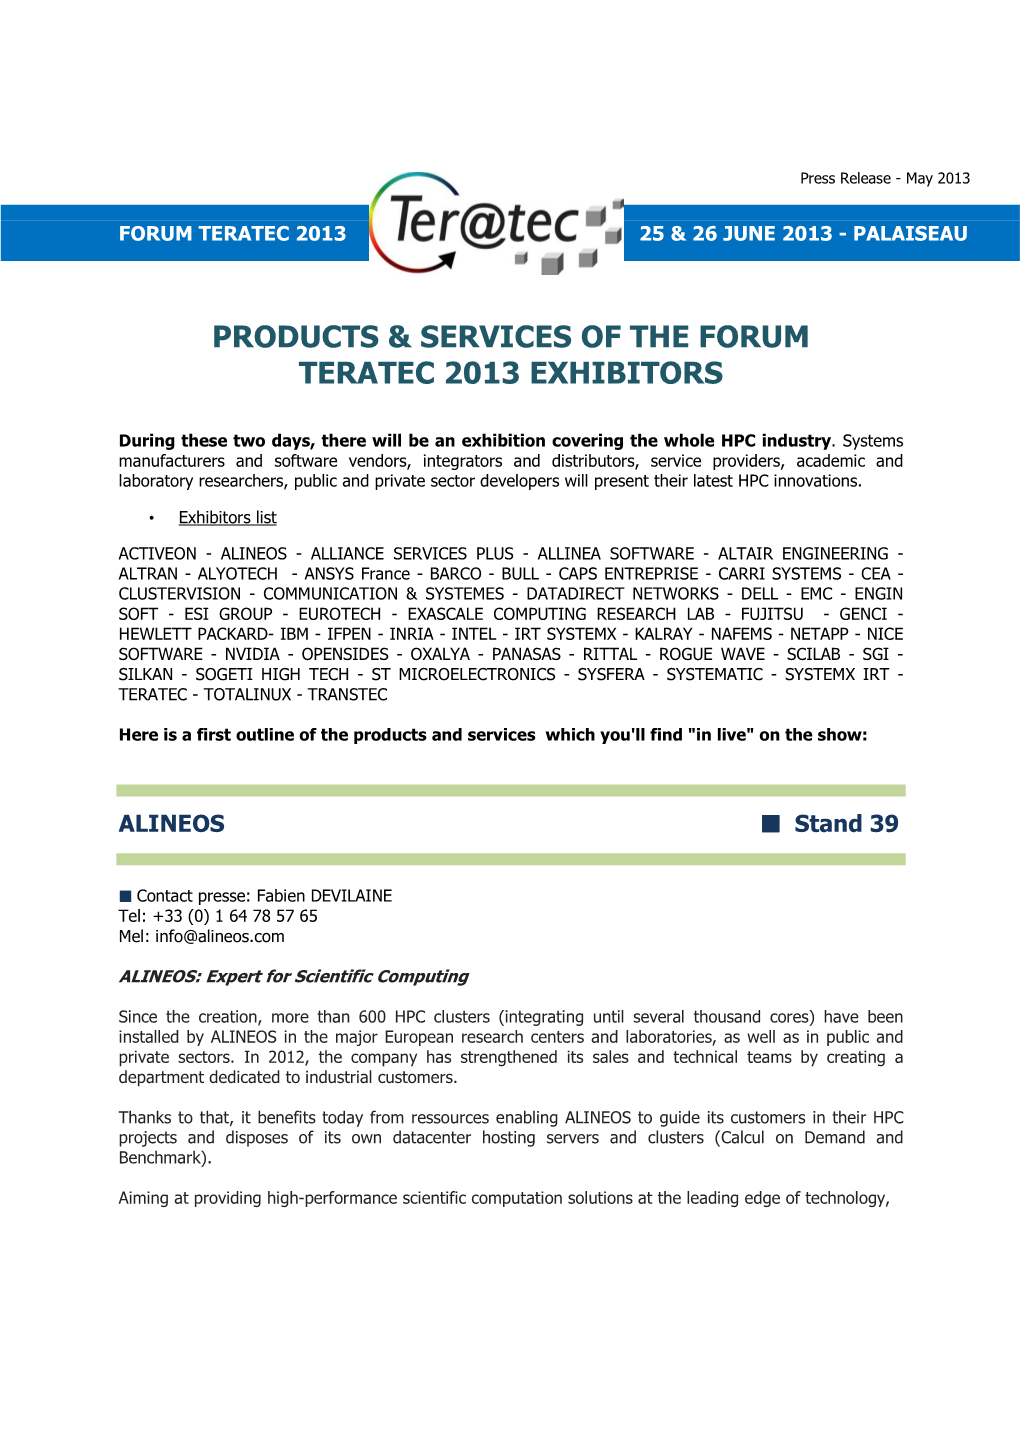 Products & Services of the Forum Teratec 2013 Exhibitors